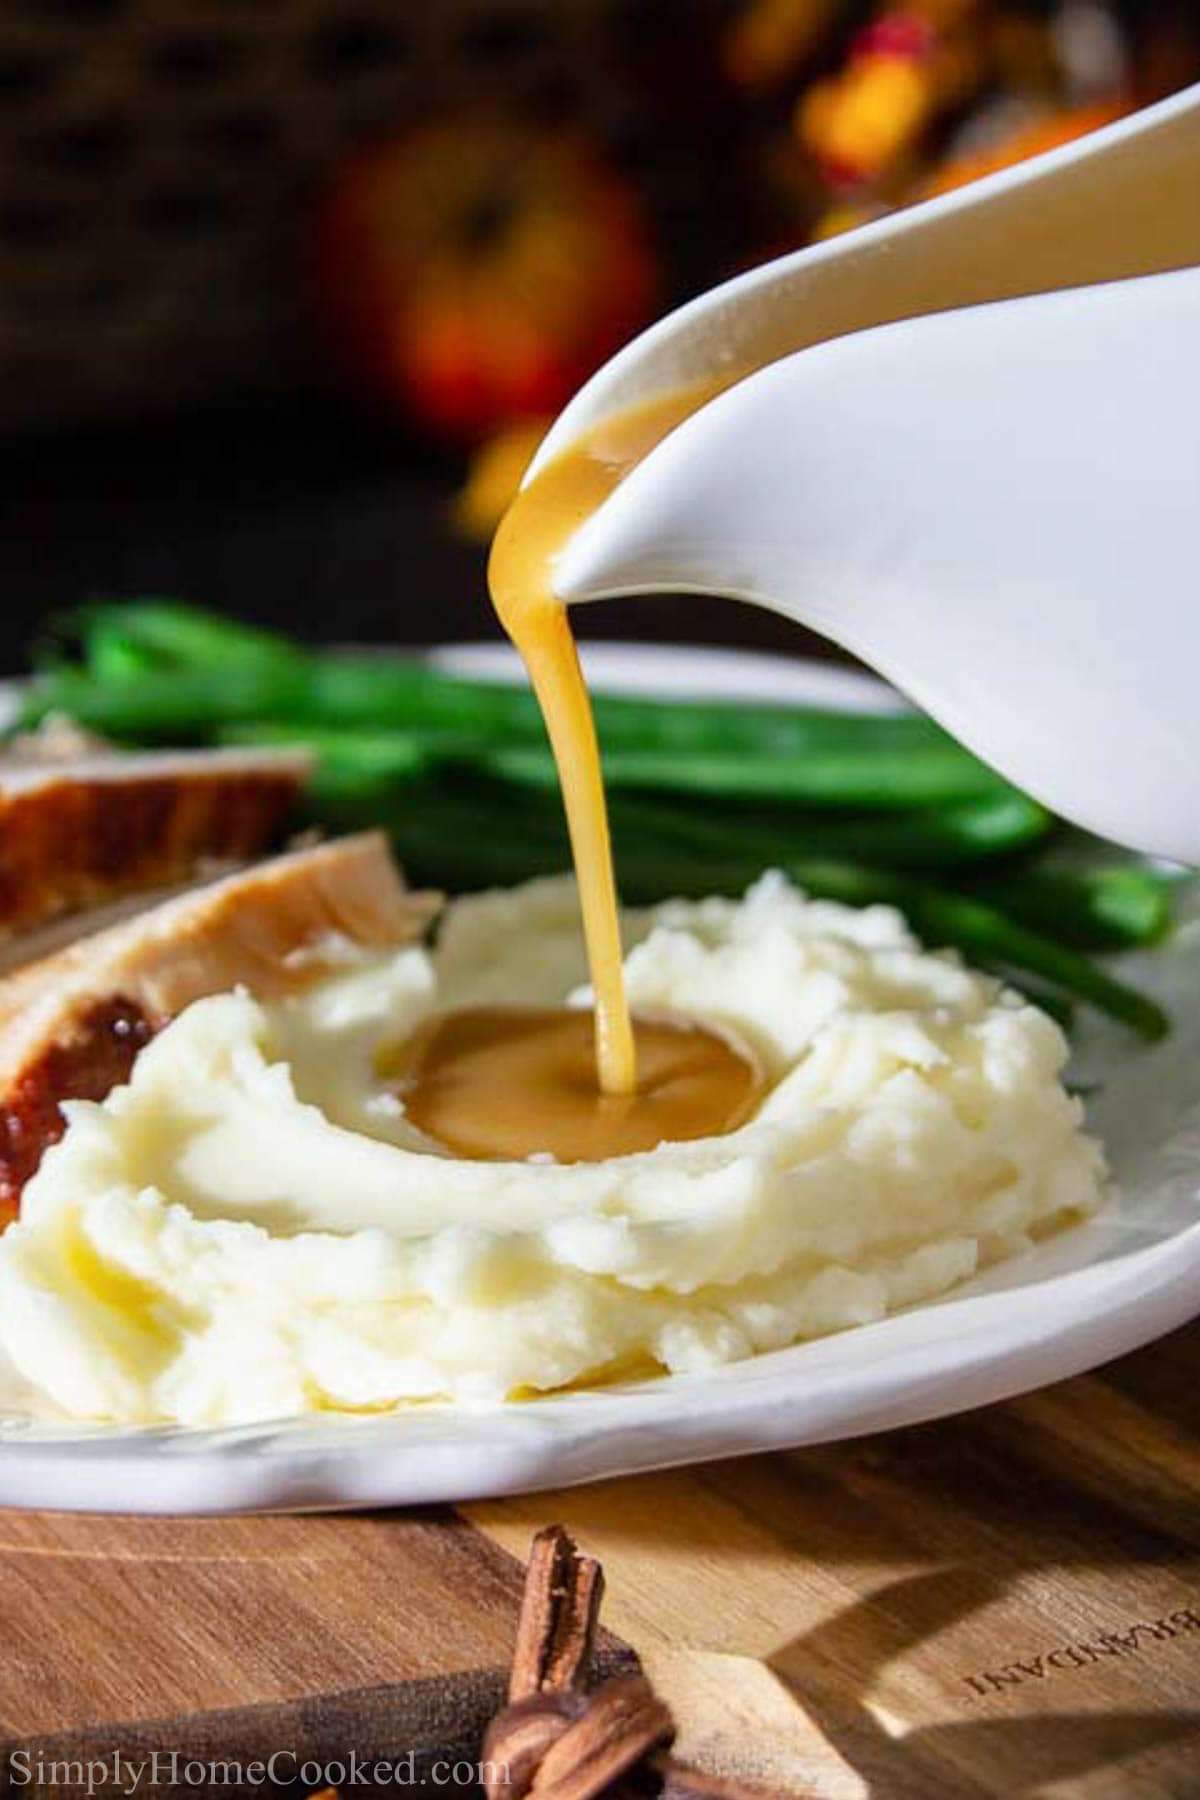 Vertical image of Turkey Gravy being drizzled on to mashed potatoes